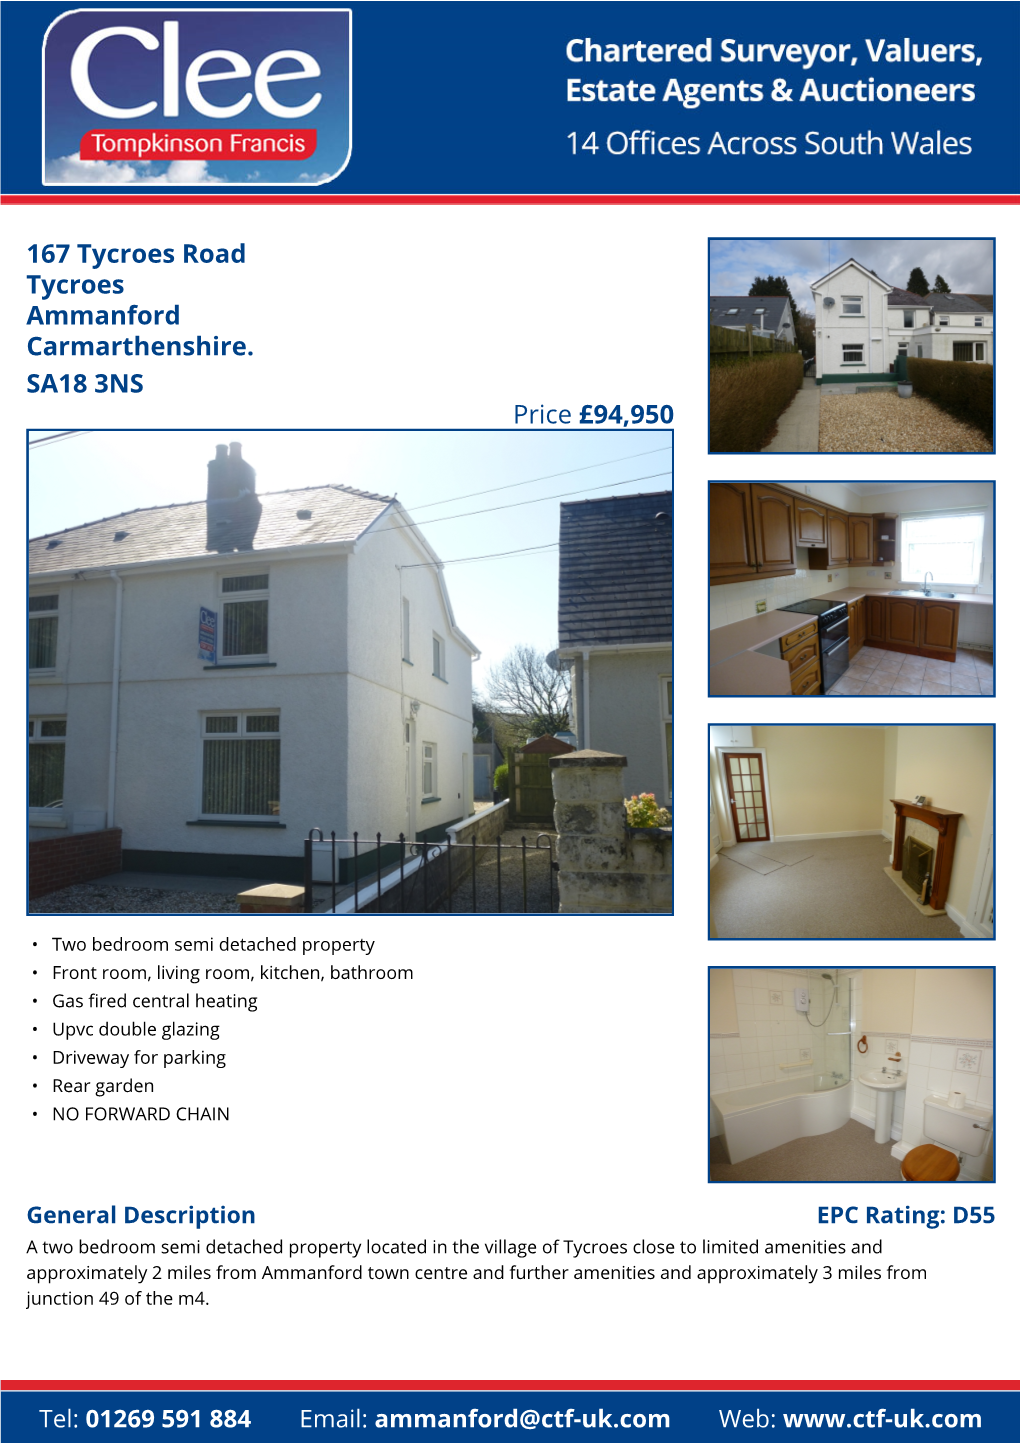 167 Tycroes Road Tycroes Ammanford Carmarthenshire. SA18 3NS Price £94,950